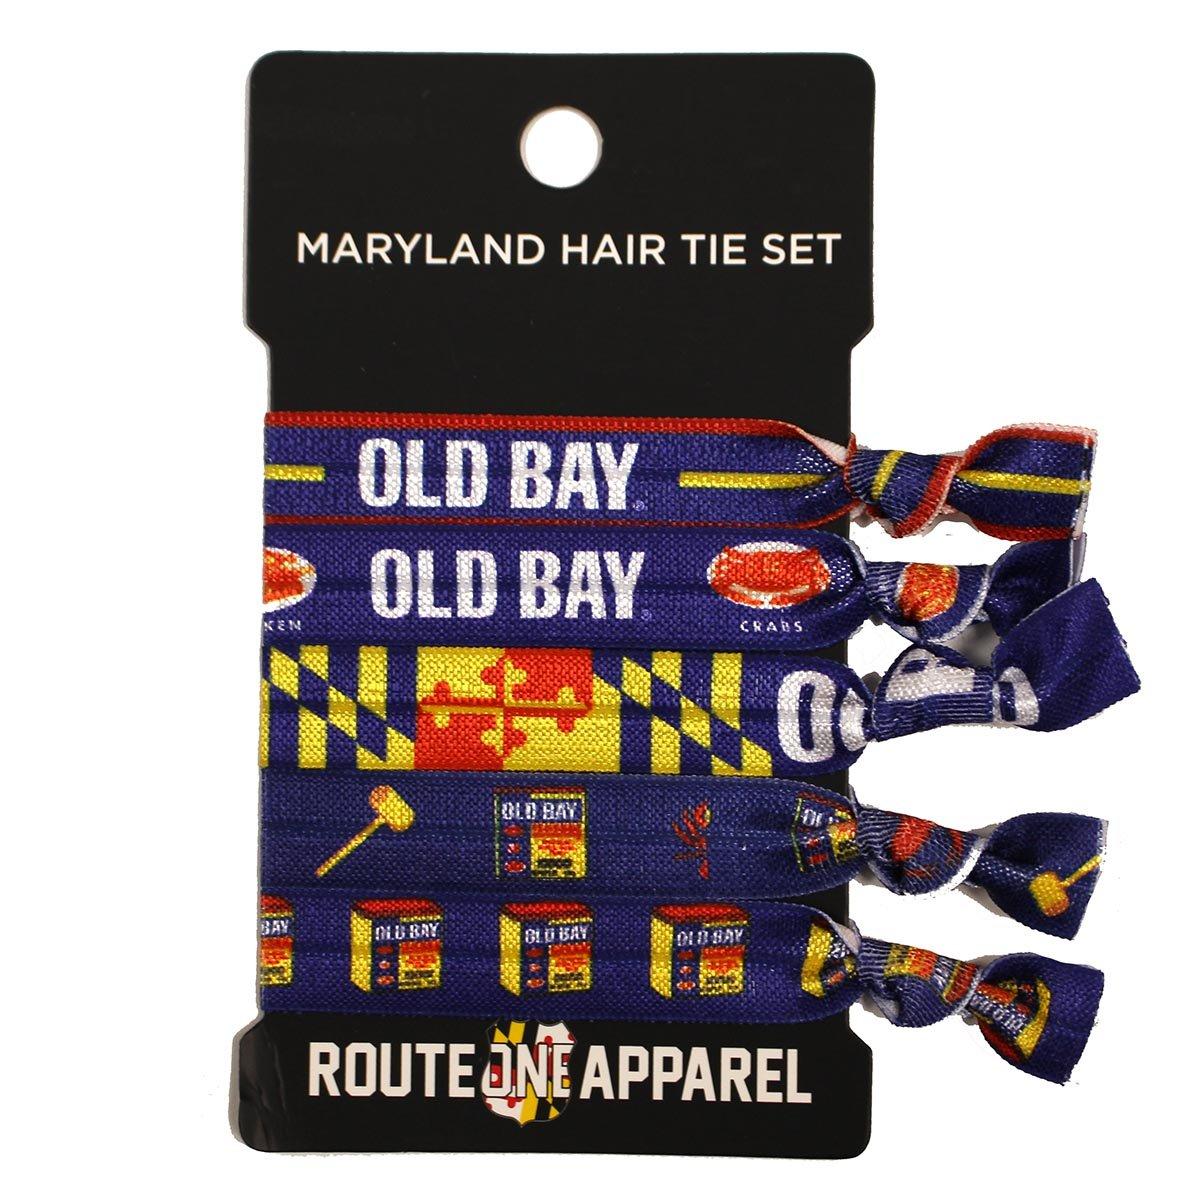 Old Bay / 5-Piece Hair Tie Set - Route One Apparel